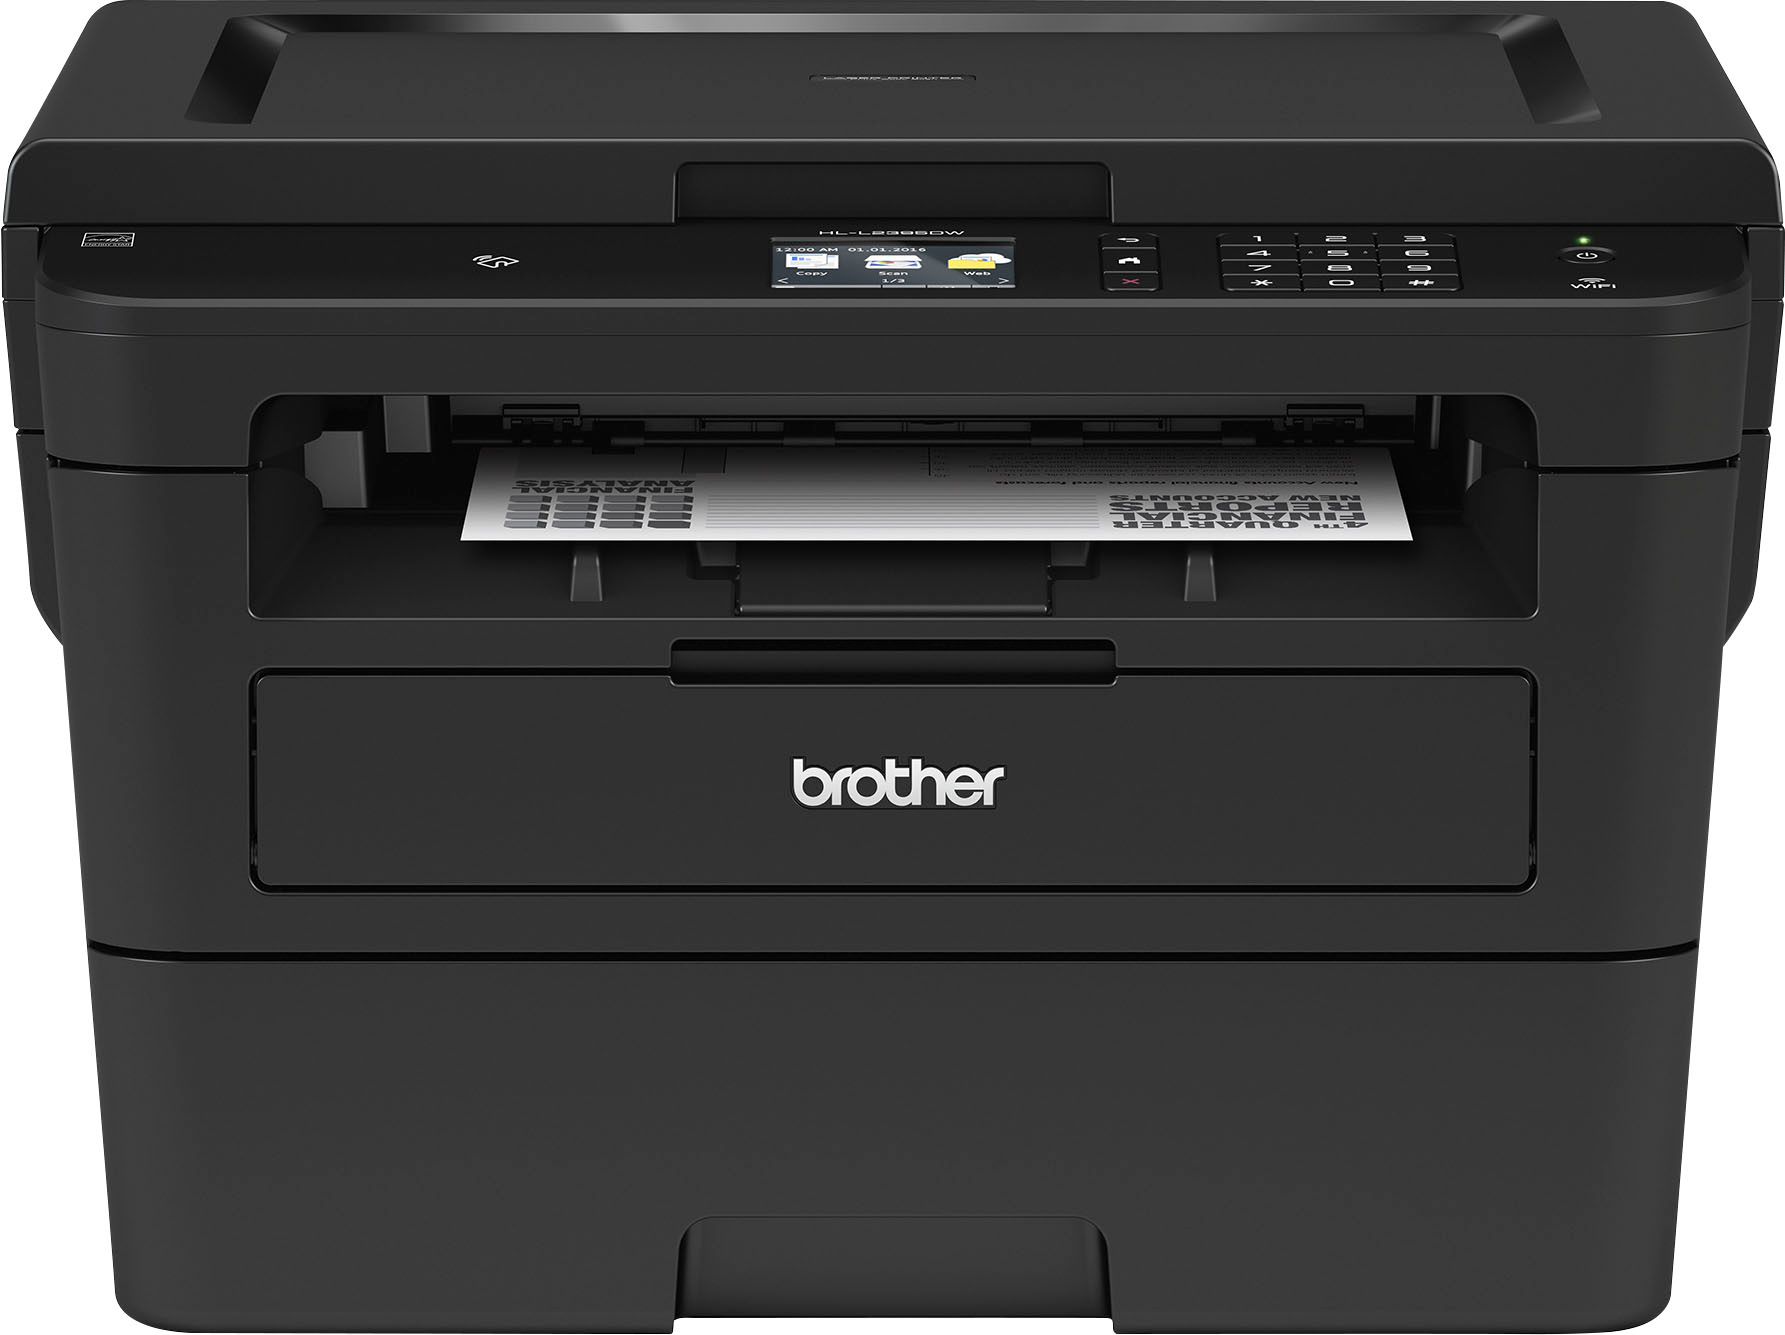 Brother MFC-L2710DW All-in-One Laser Printer